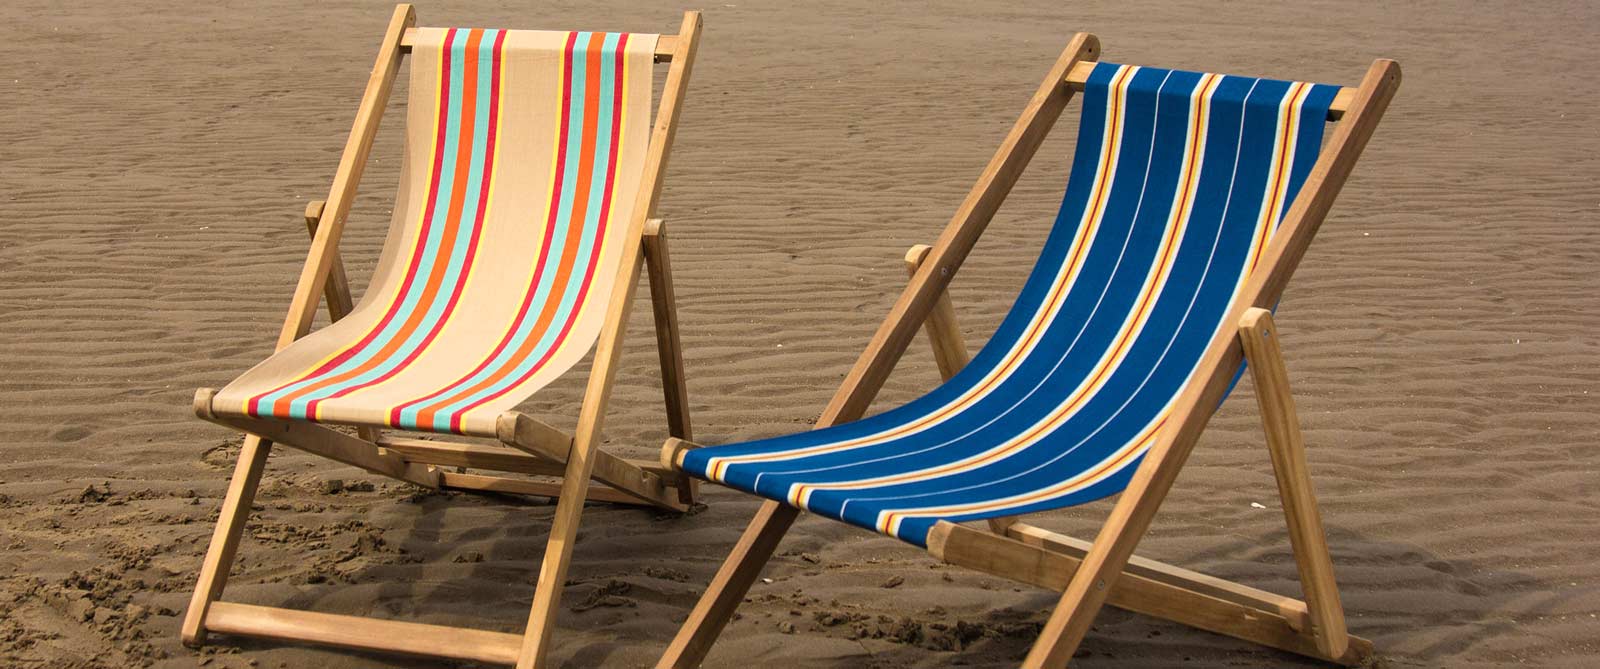 Deckchairs | Buy Folding Wooden Deck Chairs